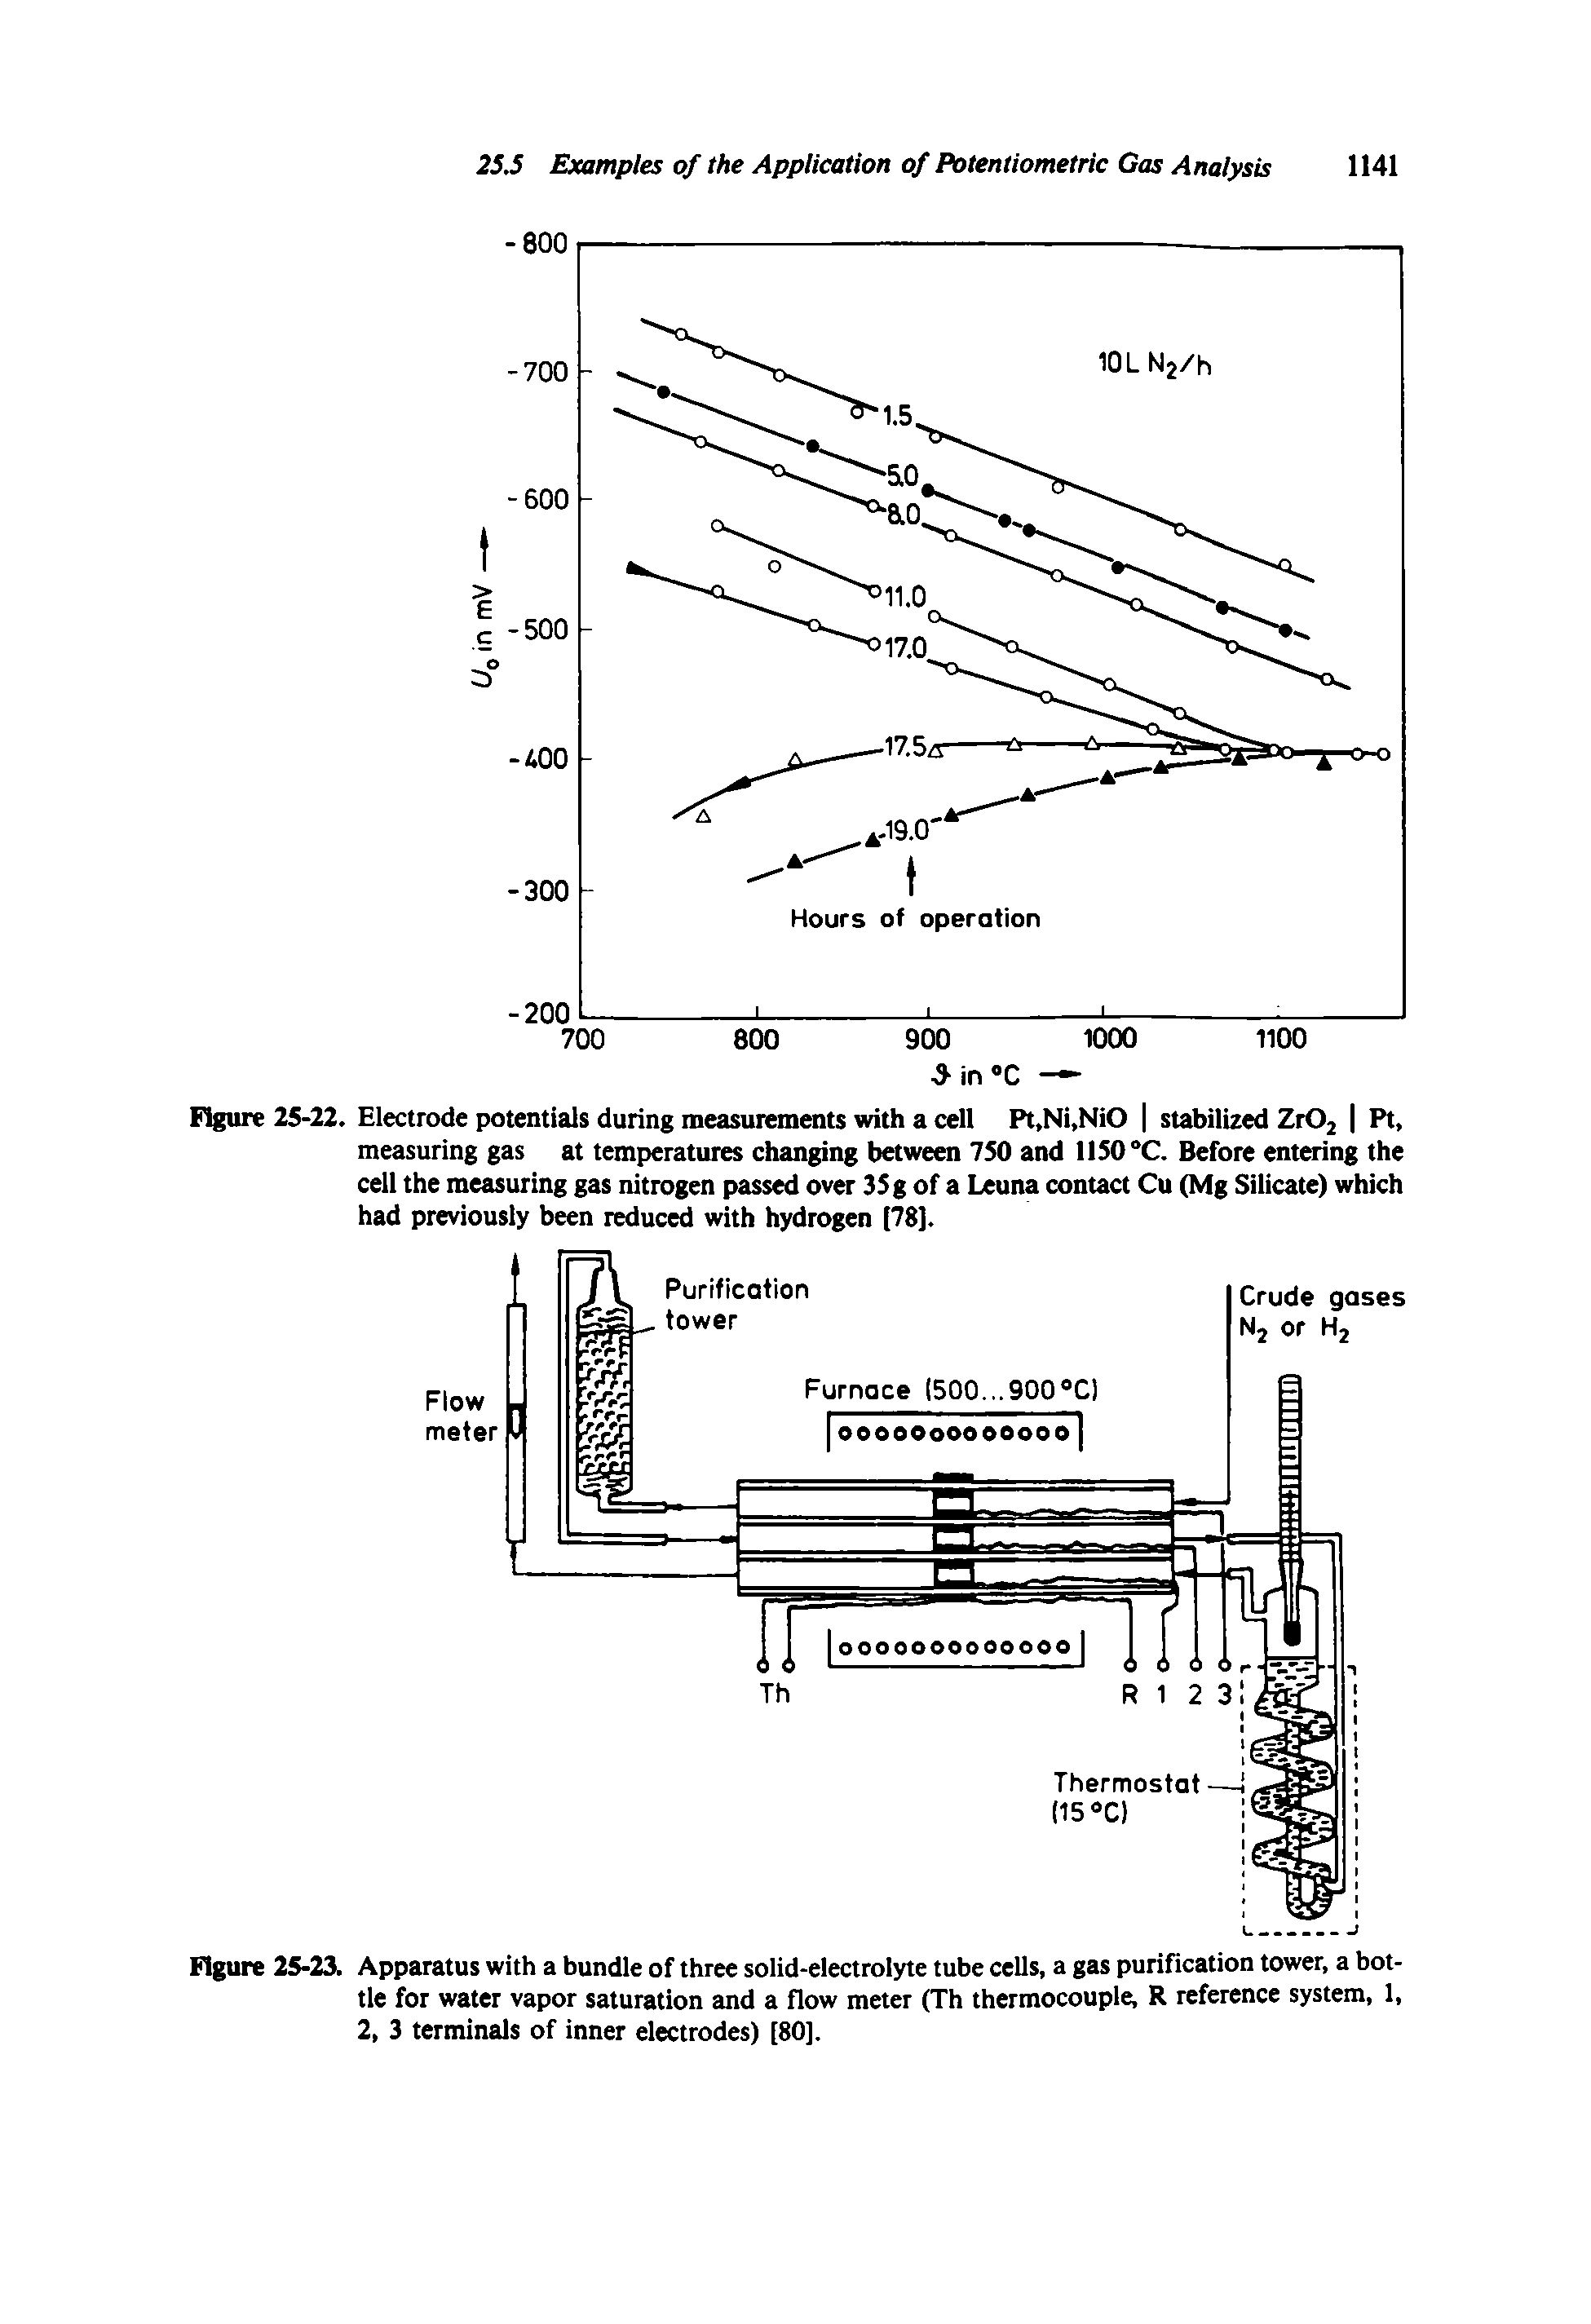 Figure 25-23. Apparatus with a bundle of three solid-electrolyte tube cells, a gas purification tower, a bottle for water vapor saturation and a flow meter (Th thermocouple, R reference system, 1, 2, 3 terminals of inner electrodes) [80],...